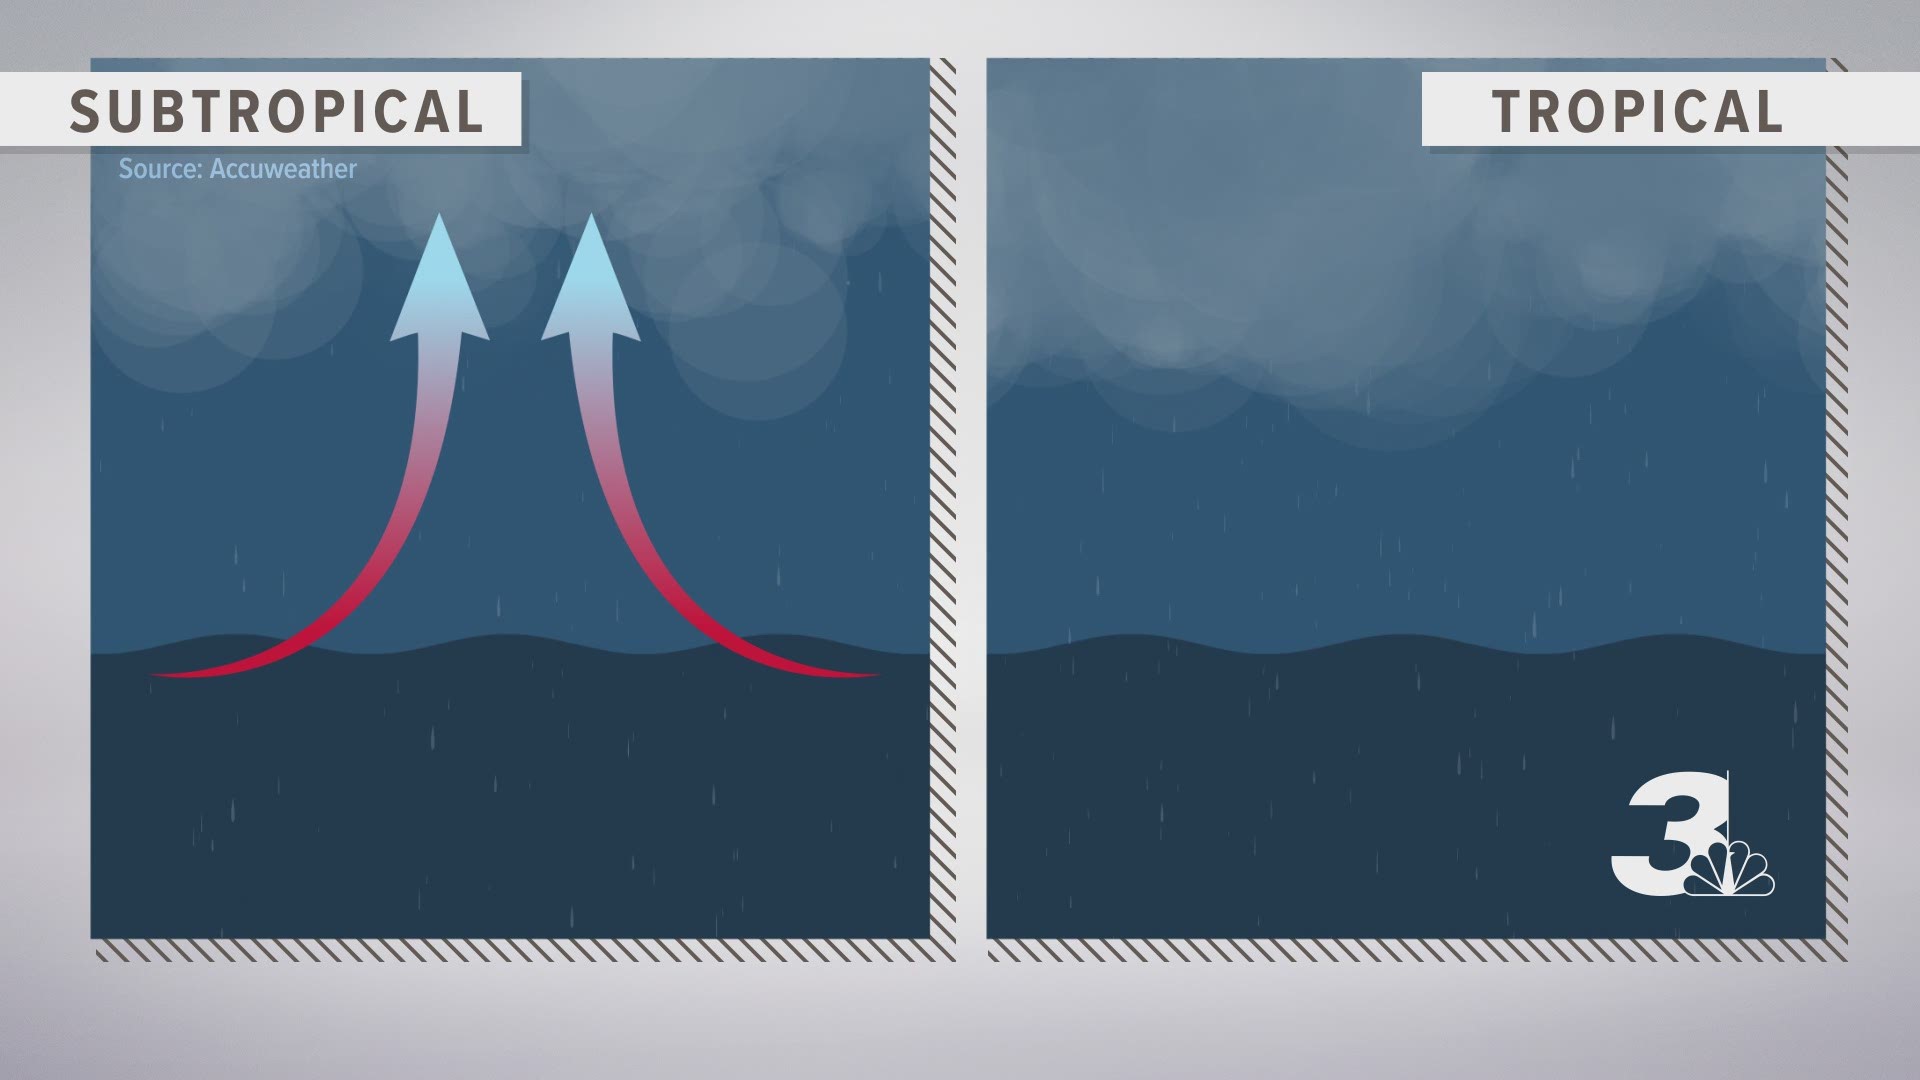 Subtropical Storm Alberto is winding up in the Gulf of Mexico. But was is the difference between a Subtropical Storm and a Tropical Storm? WKYC Meteorologist Matt Wintz explains. #3weather